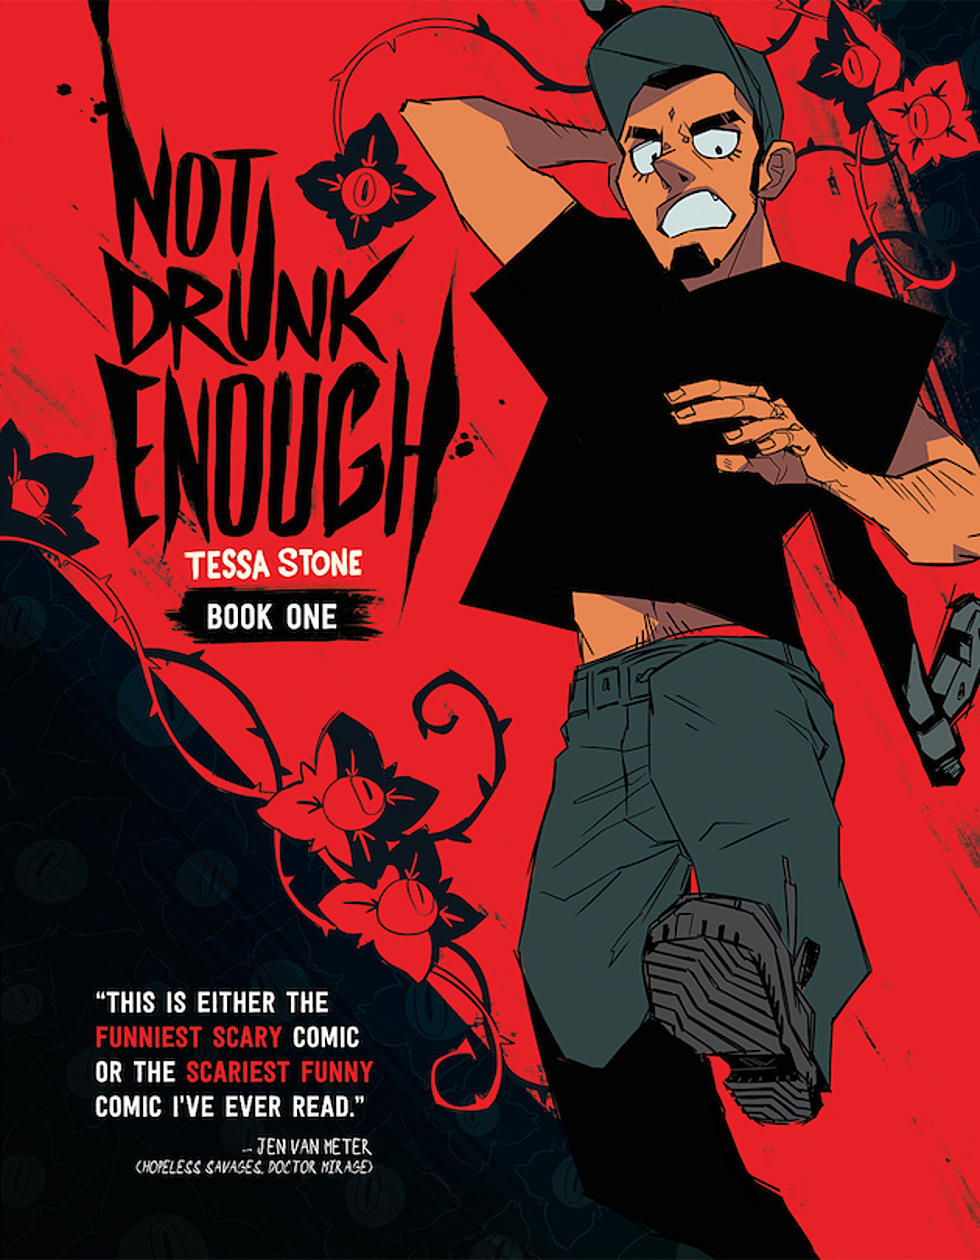 Tessa Stone&#8217;s Horror-Comedy &#8216;Not Drunk Enough&#8217; Picked Up By Oni Press [Exclusive]